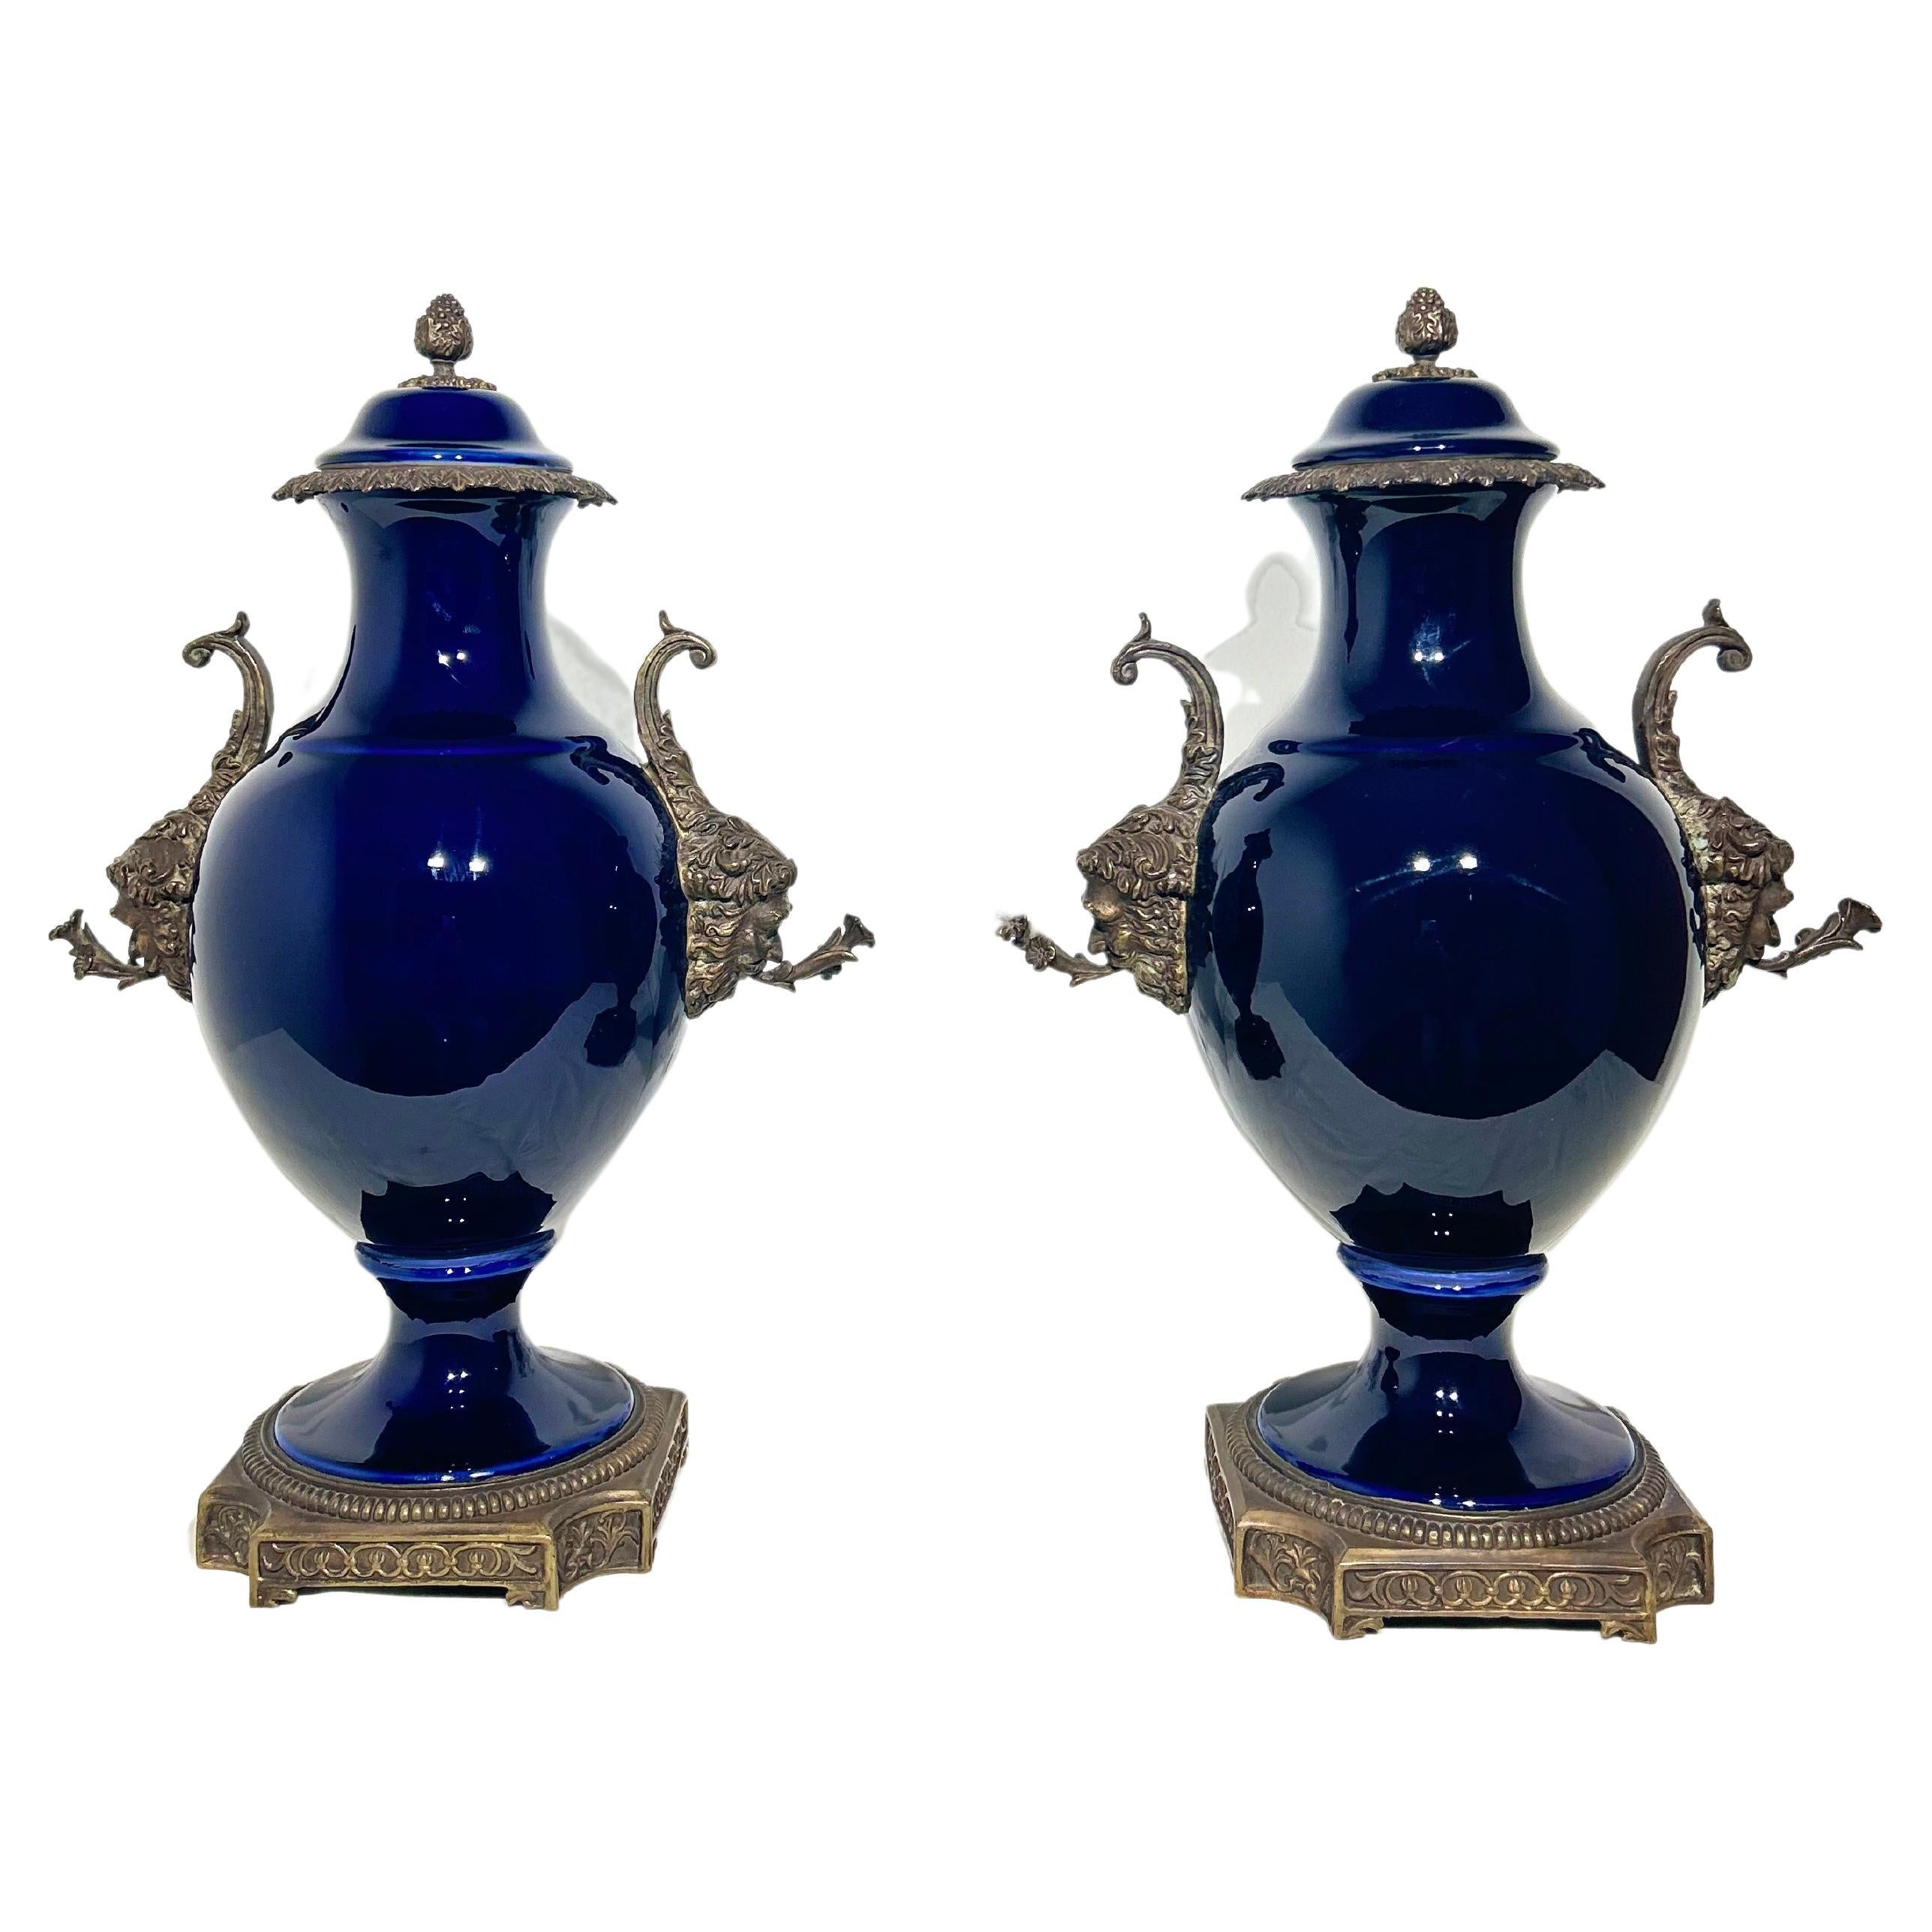 Pair of 20th Century China Urns with Bronze Mounted Handles Depicting Bacchus